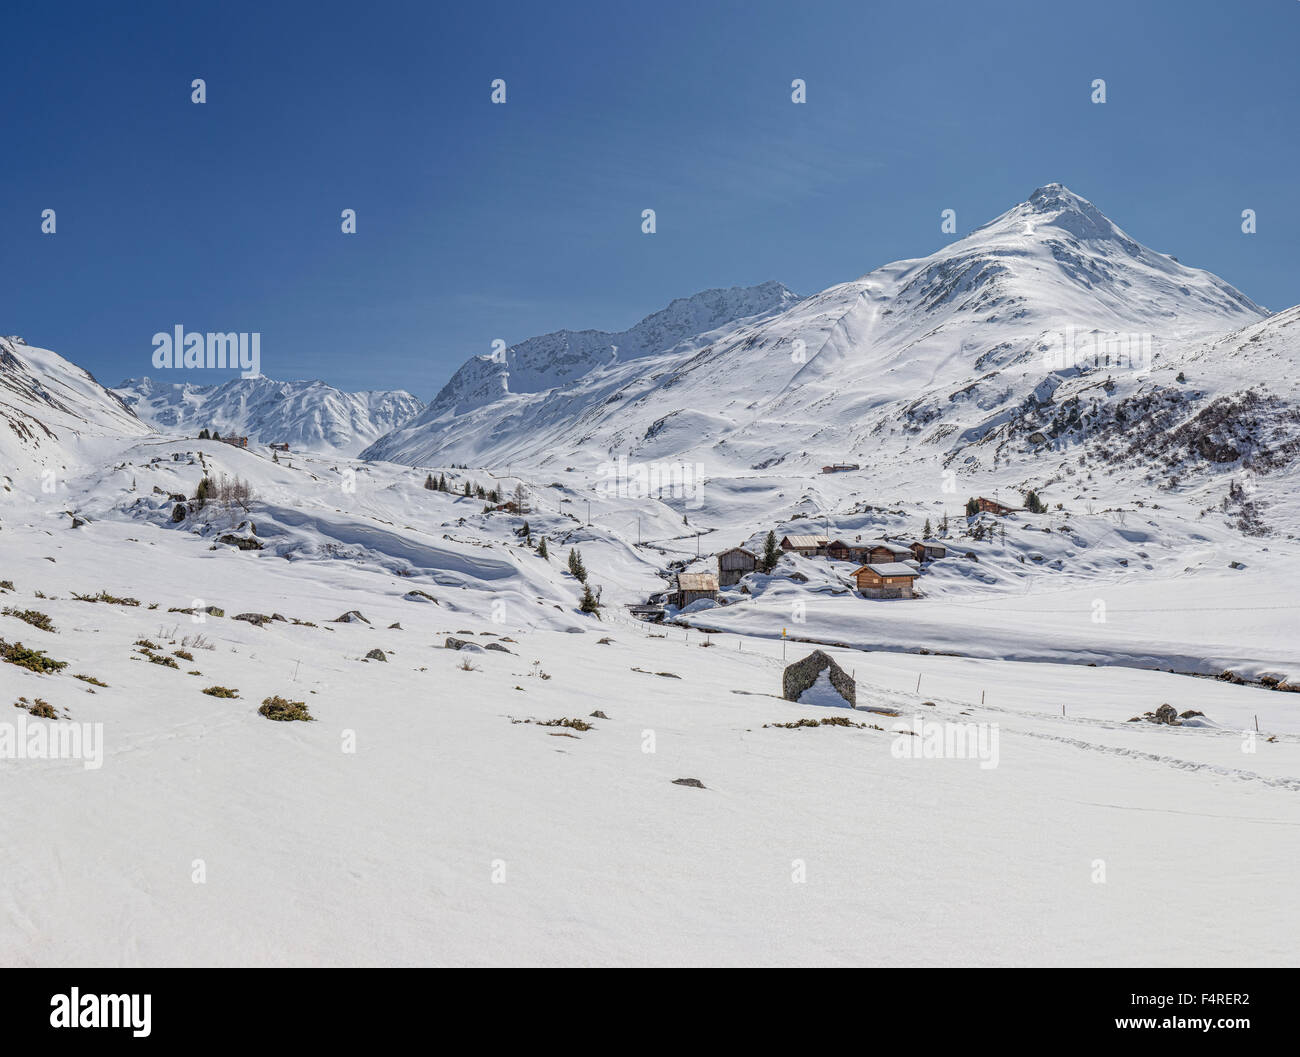 Davos Switzerland Landscape High Resolution Stock Photography and Images -  Alamy